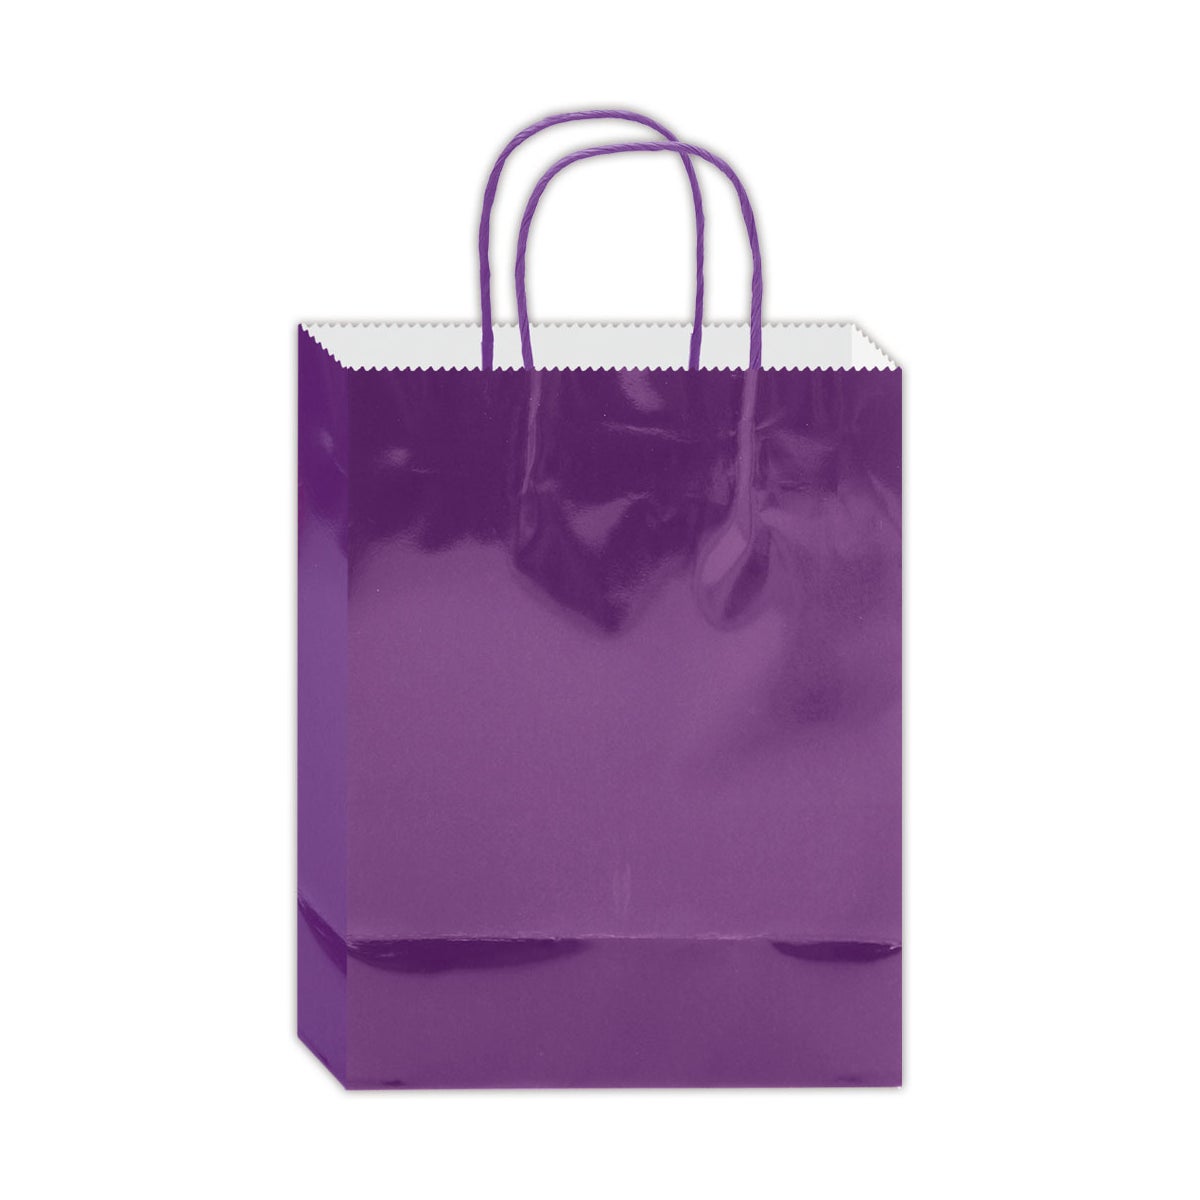 gift bag 13x10.5x5.5/L 48/96s purple glossy - solid color gift